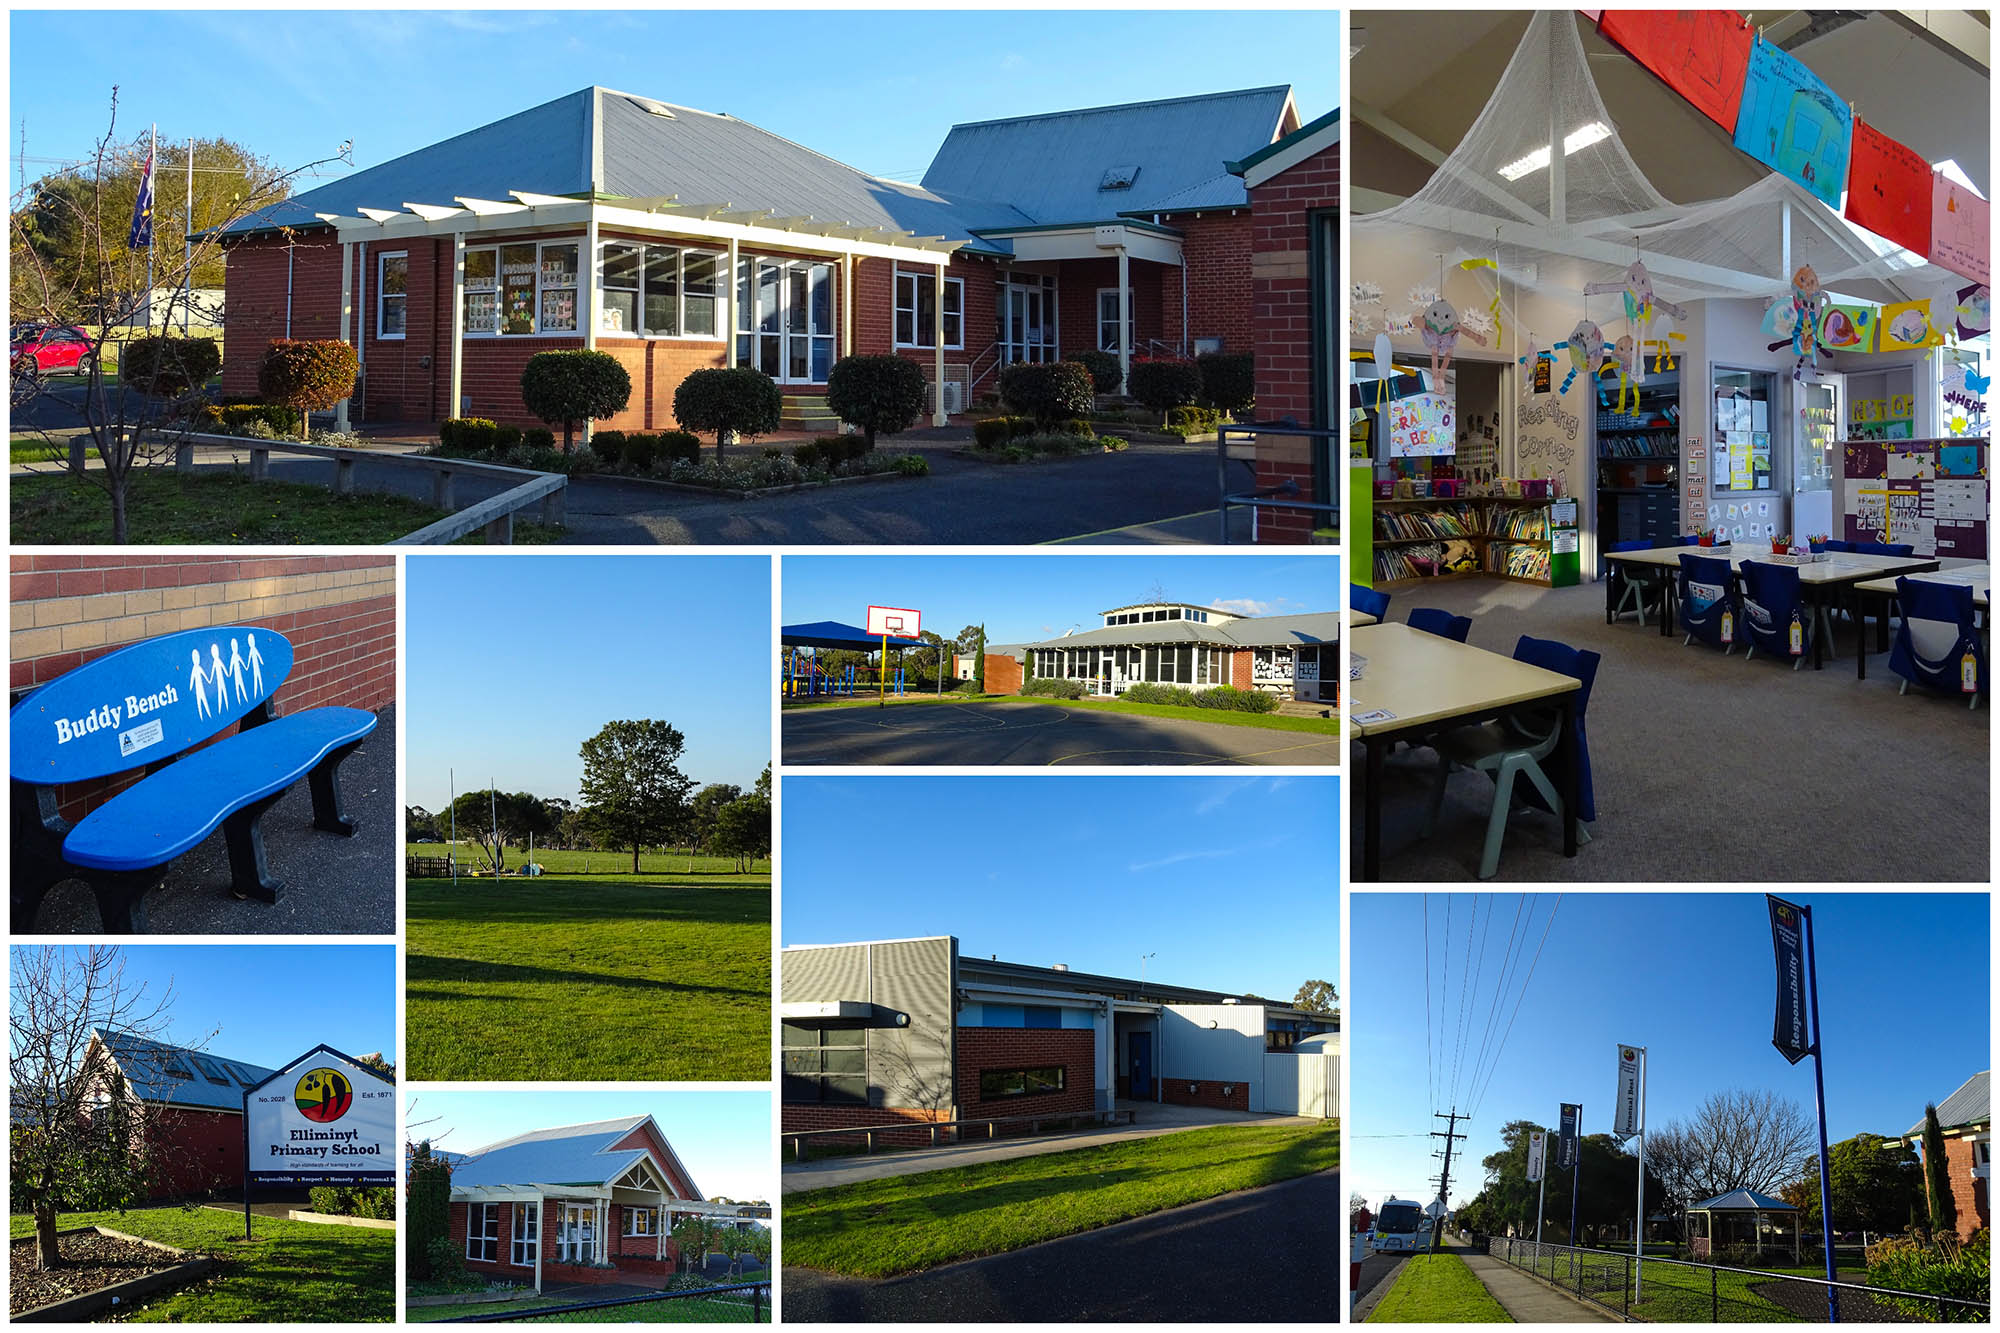 Ellimiyt Primary School Grounds Collage